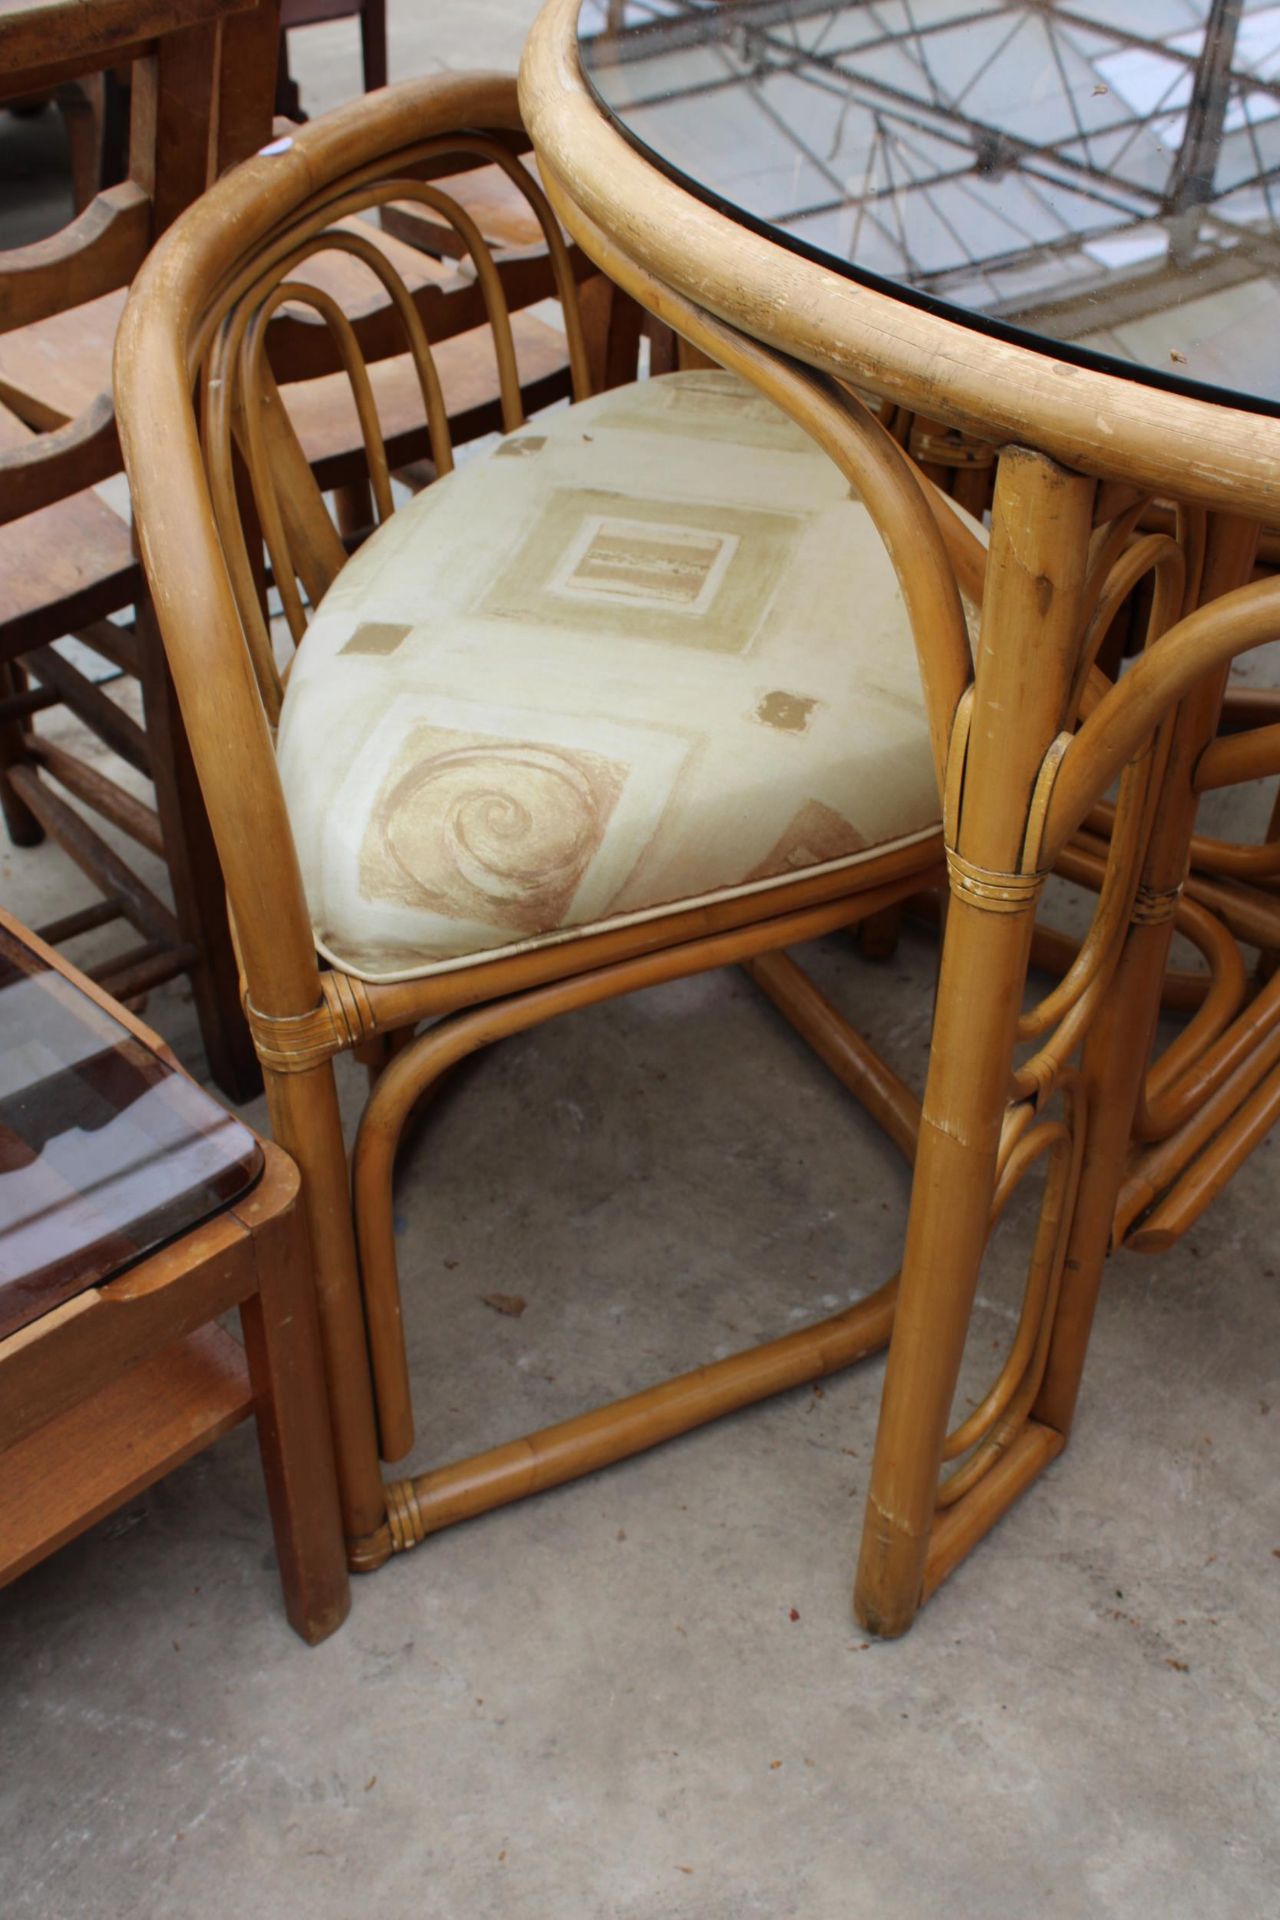 A MODERN 41" DIAMETER BAMBOO AND WICKER DINING TABLE WITH SMOKED GLASS TOP AND FOUR DINING CHAIRS - Image 5 of 6